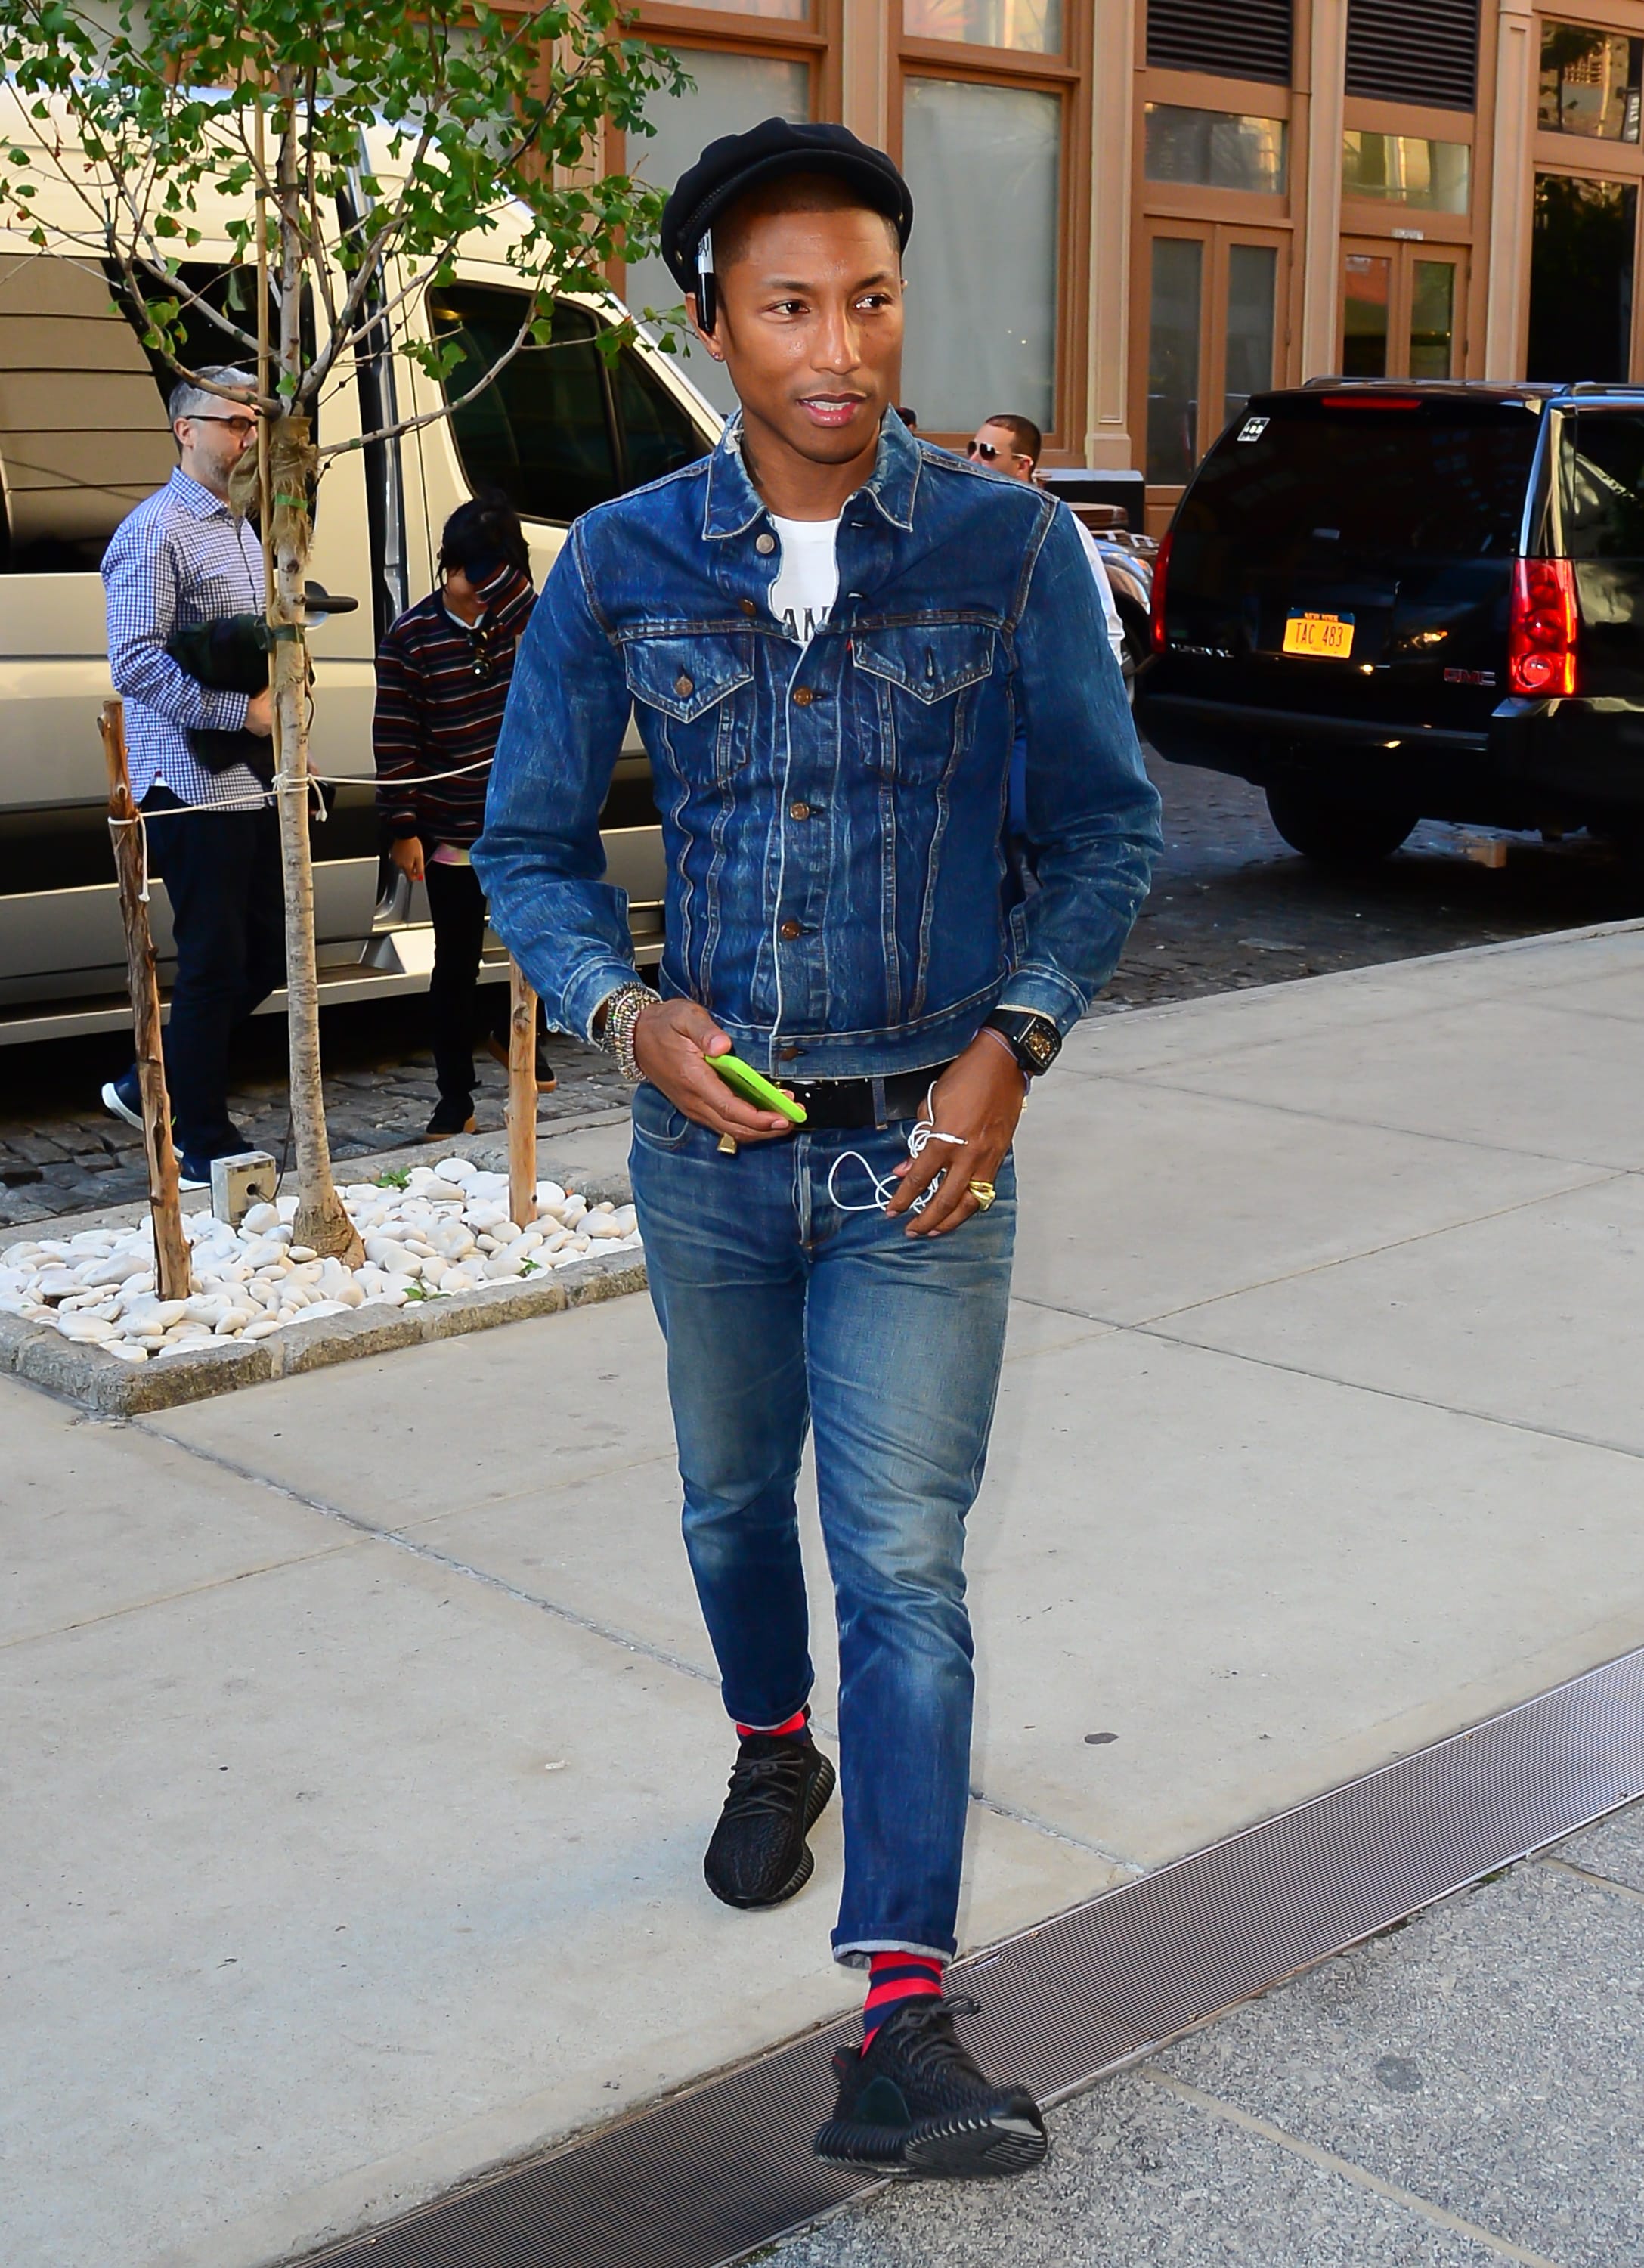 7 of Pharrell Williams' most iconic fashion moments: from his rare